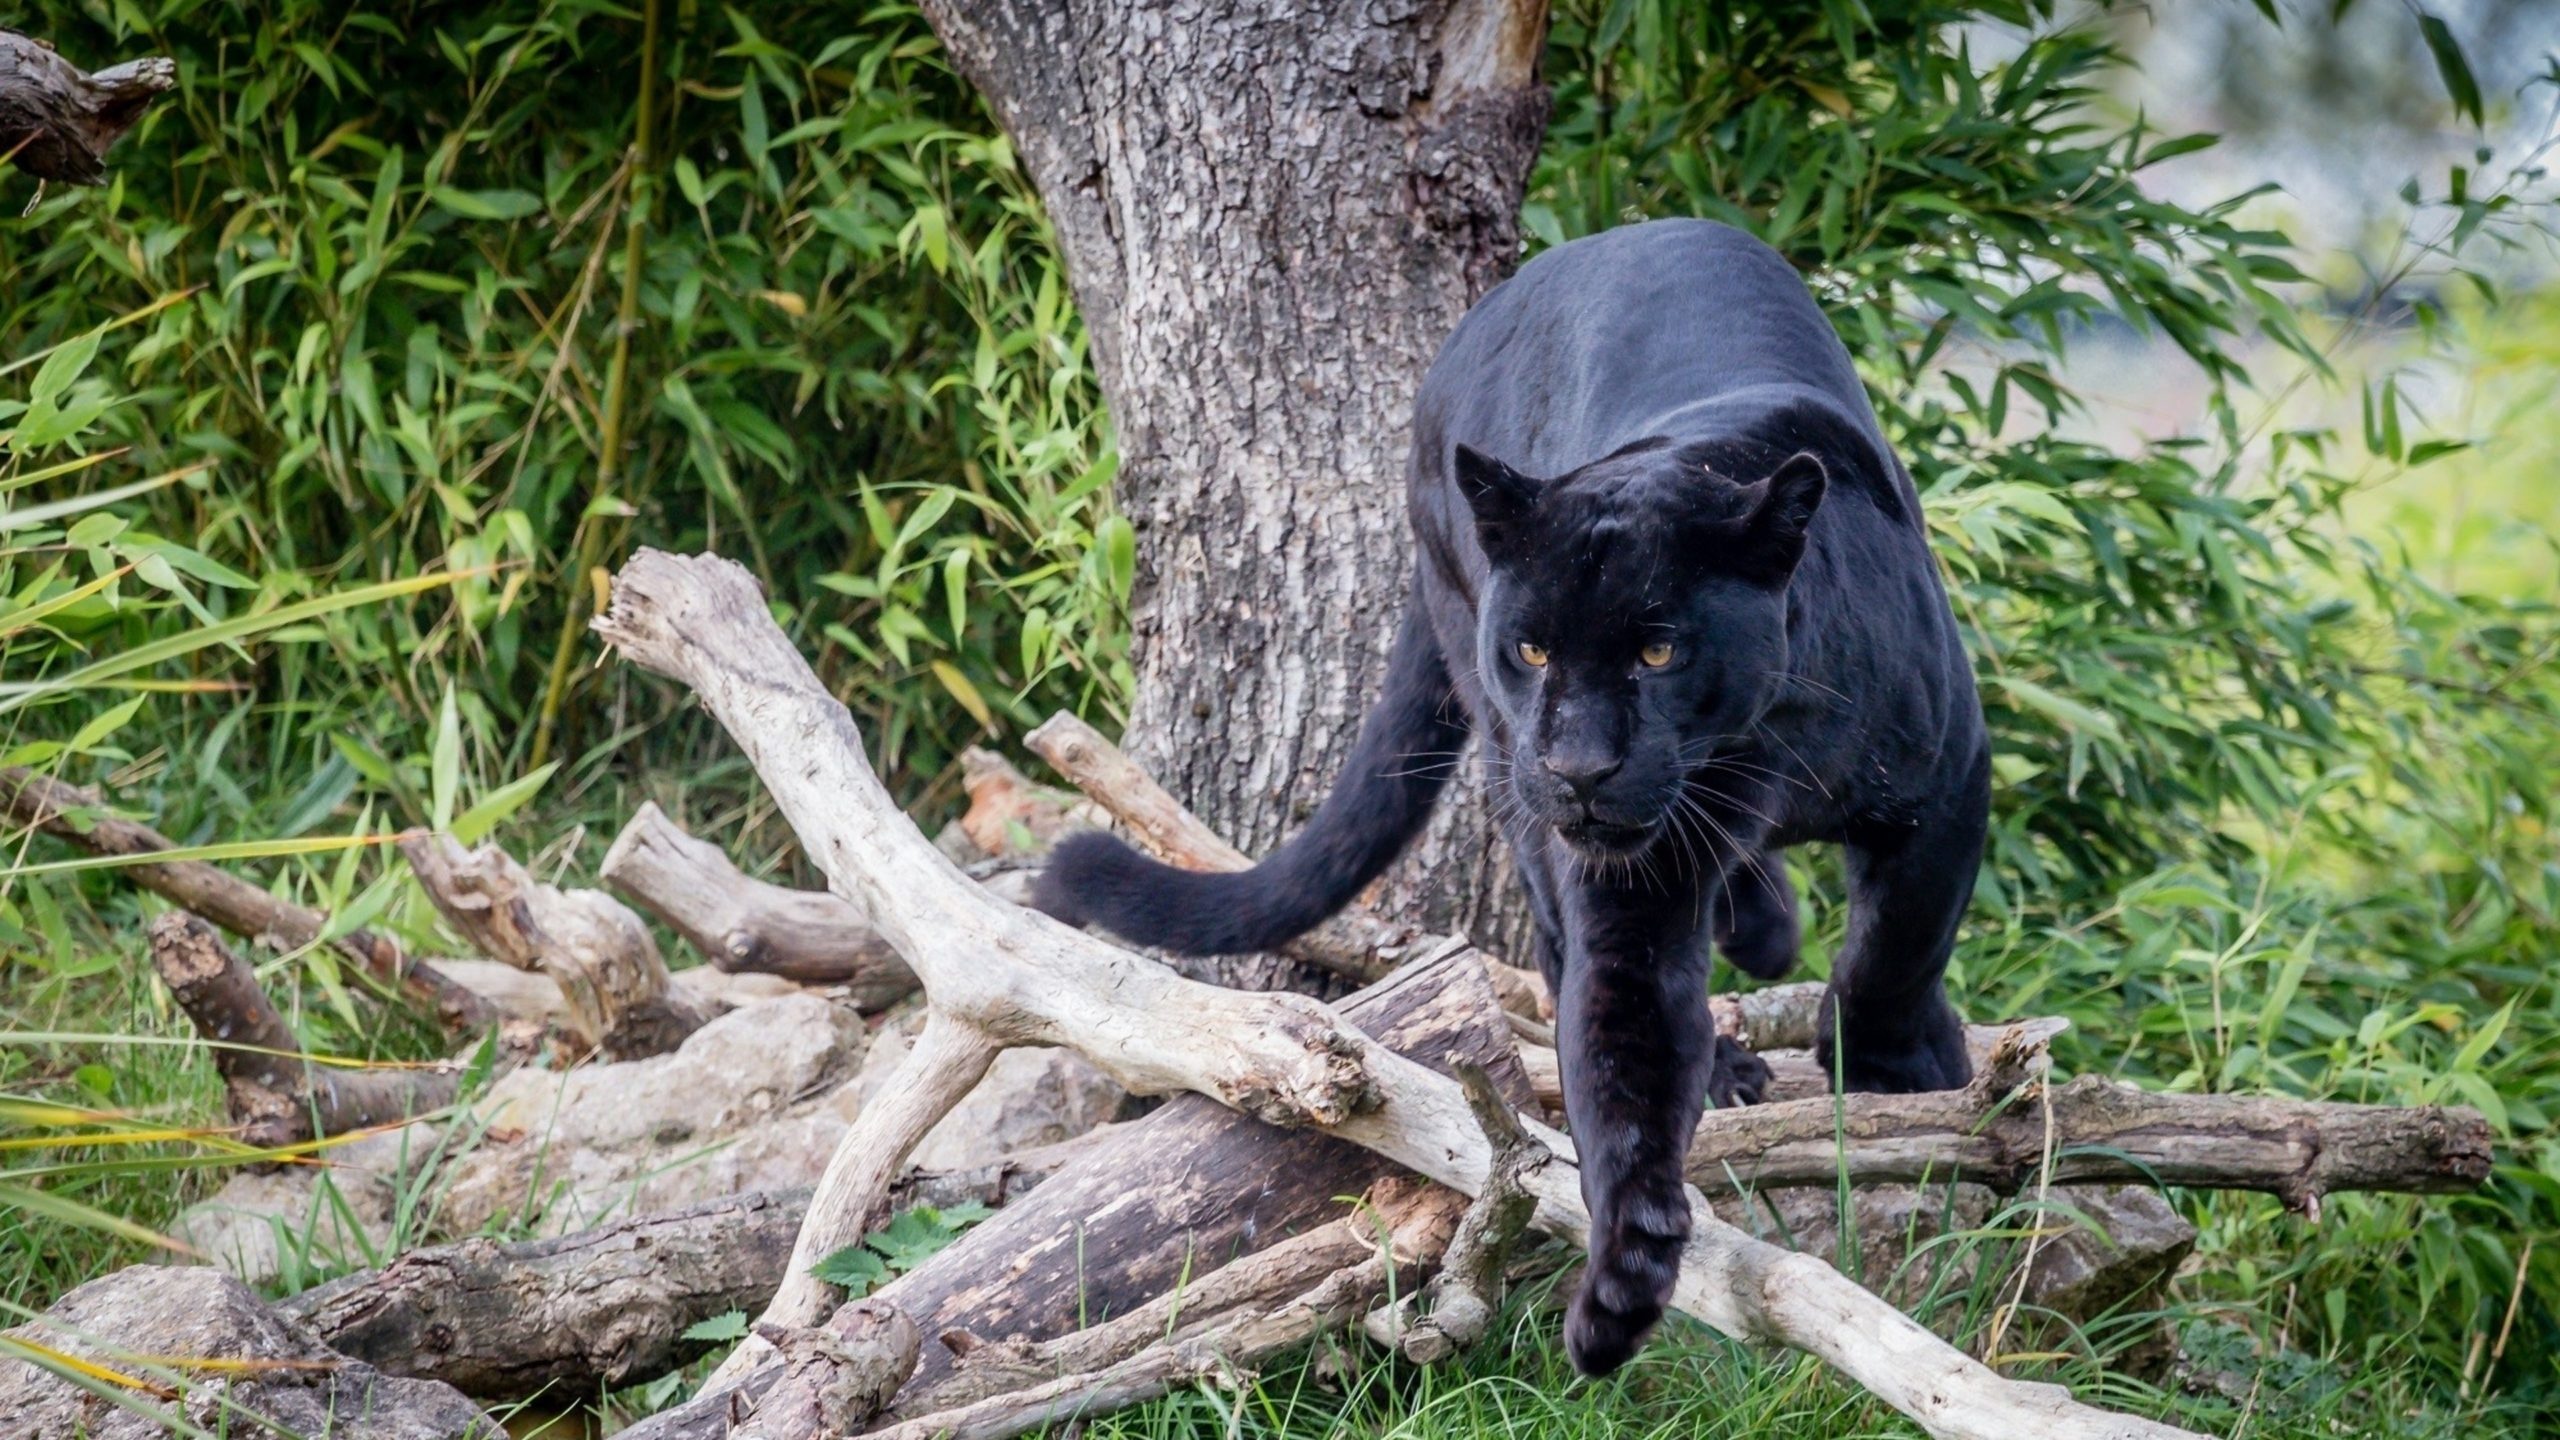 Black Panther (Animal): Large felines which come from the big cat family. 2560x1440 HD Wallpaper.